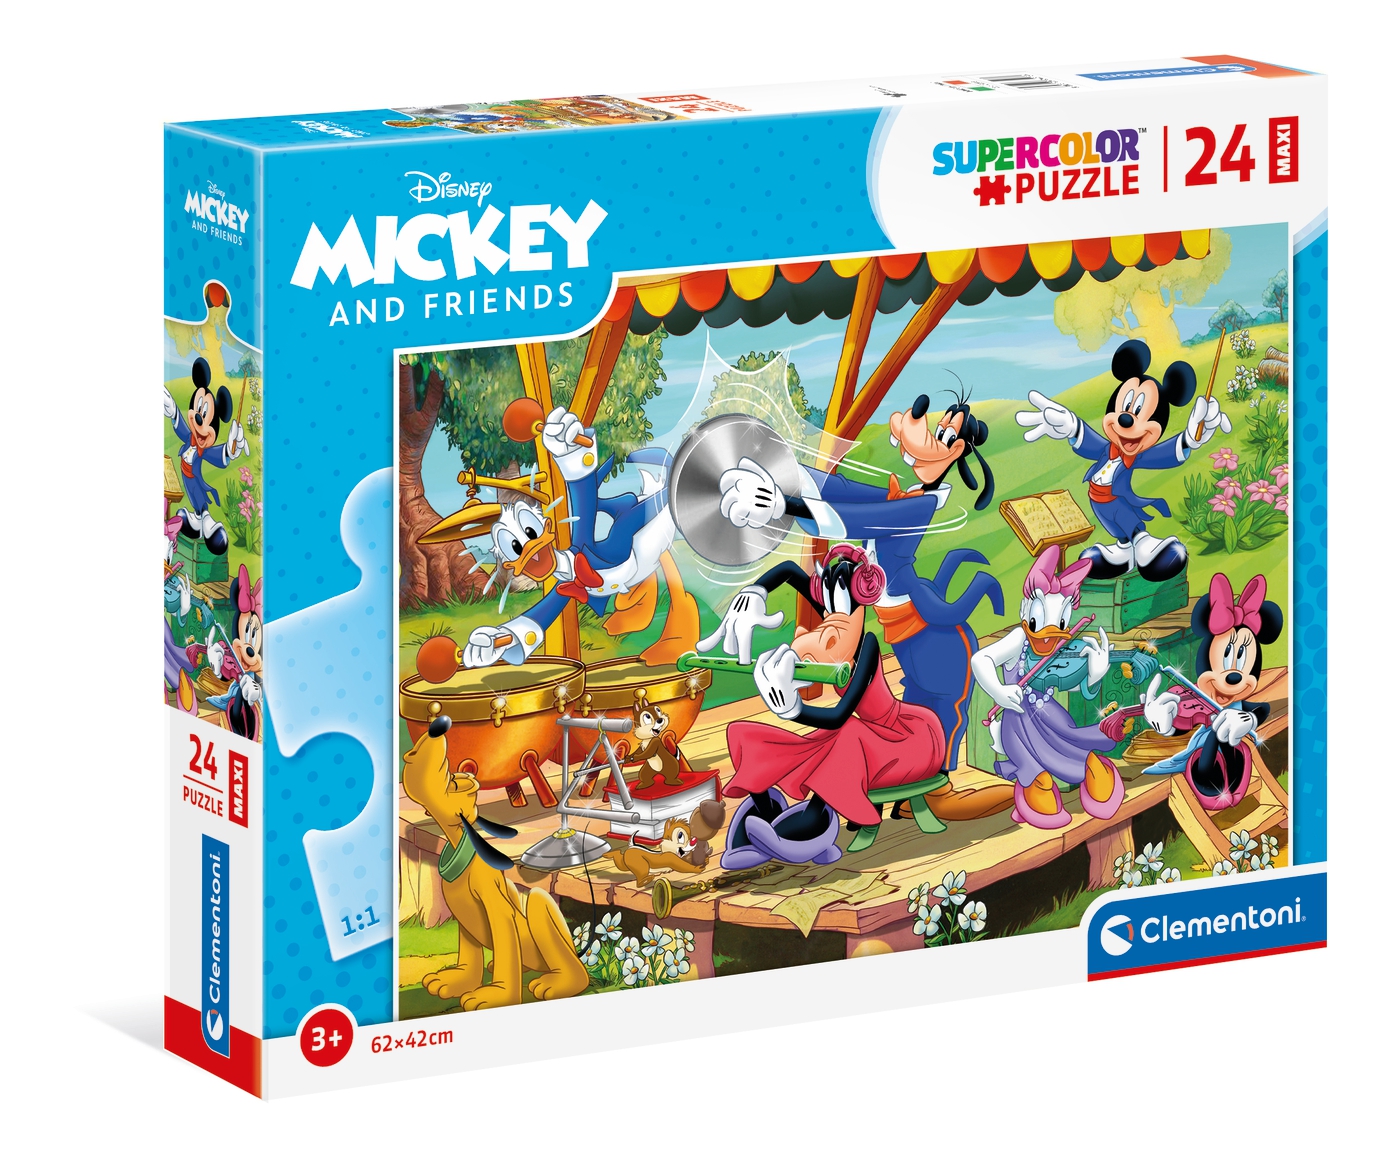 abstract Arab Attent Disney Mickey and friends - 24 el. - Supercolor Puzzle - Clementoni